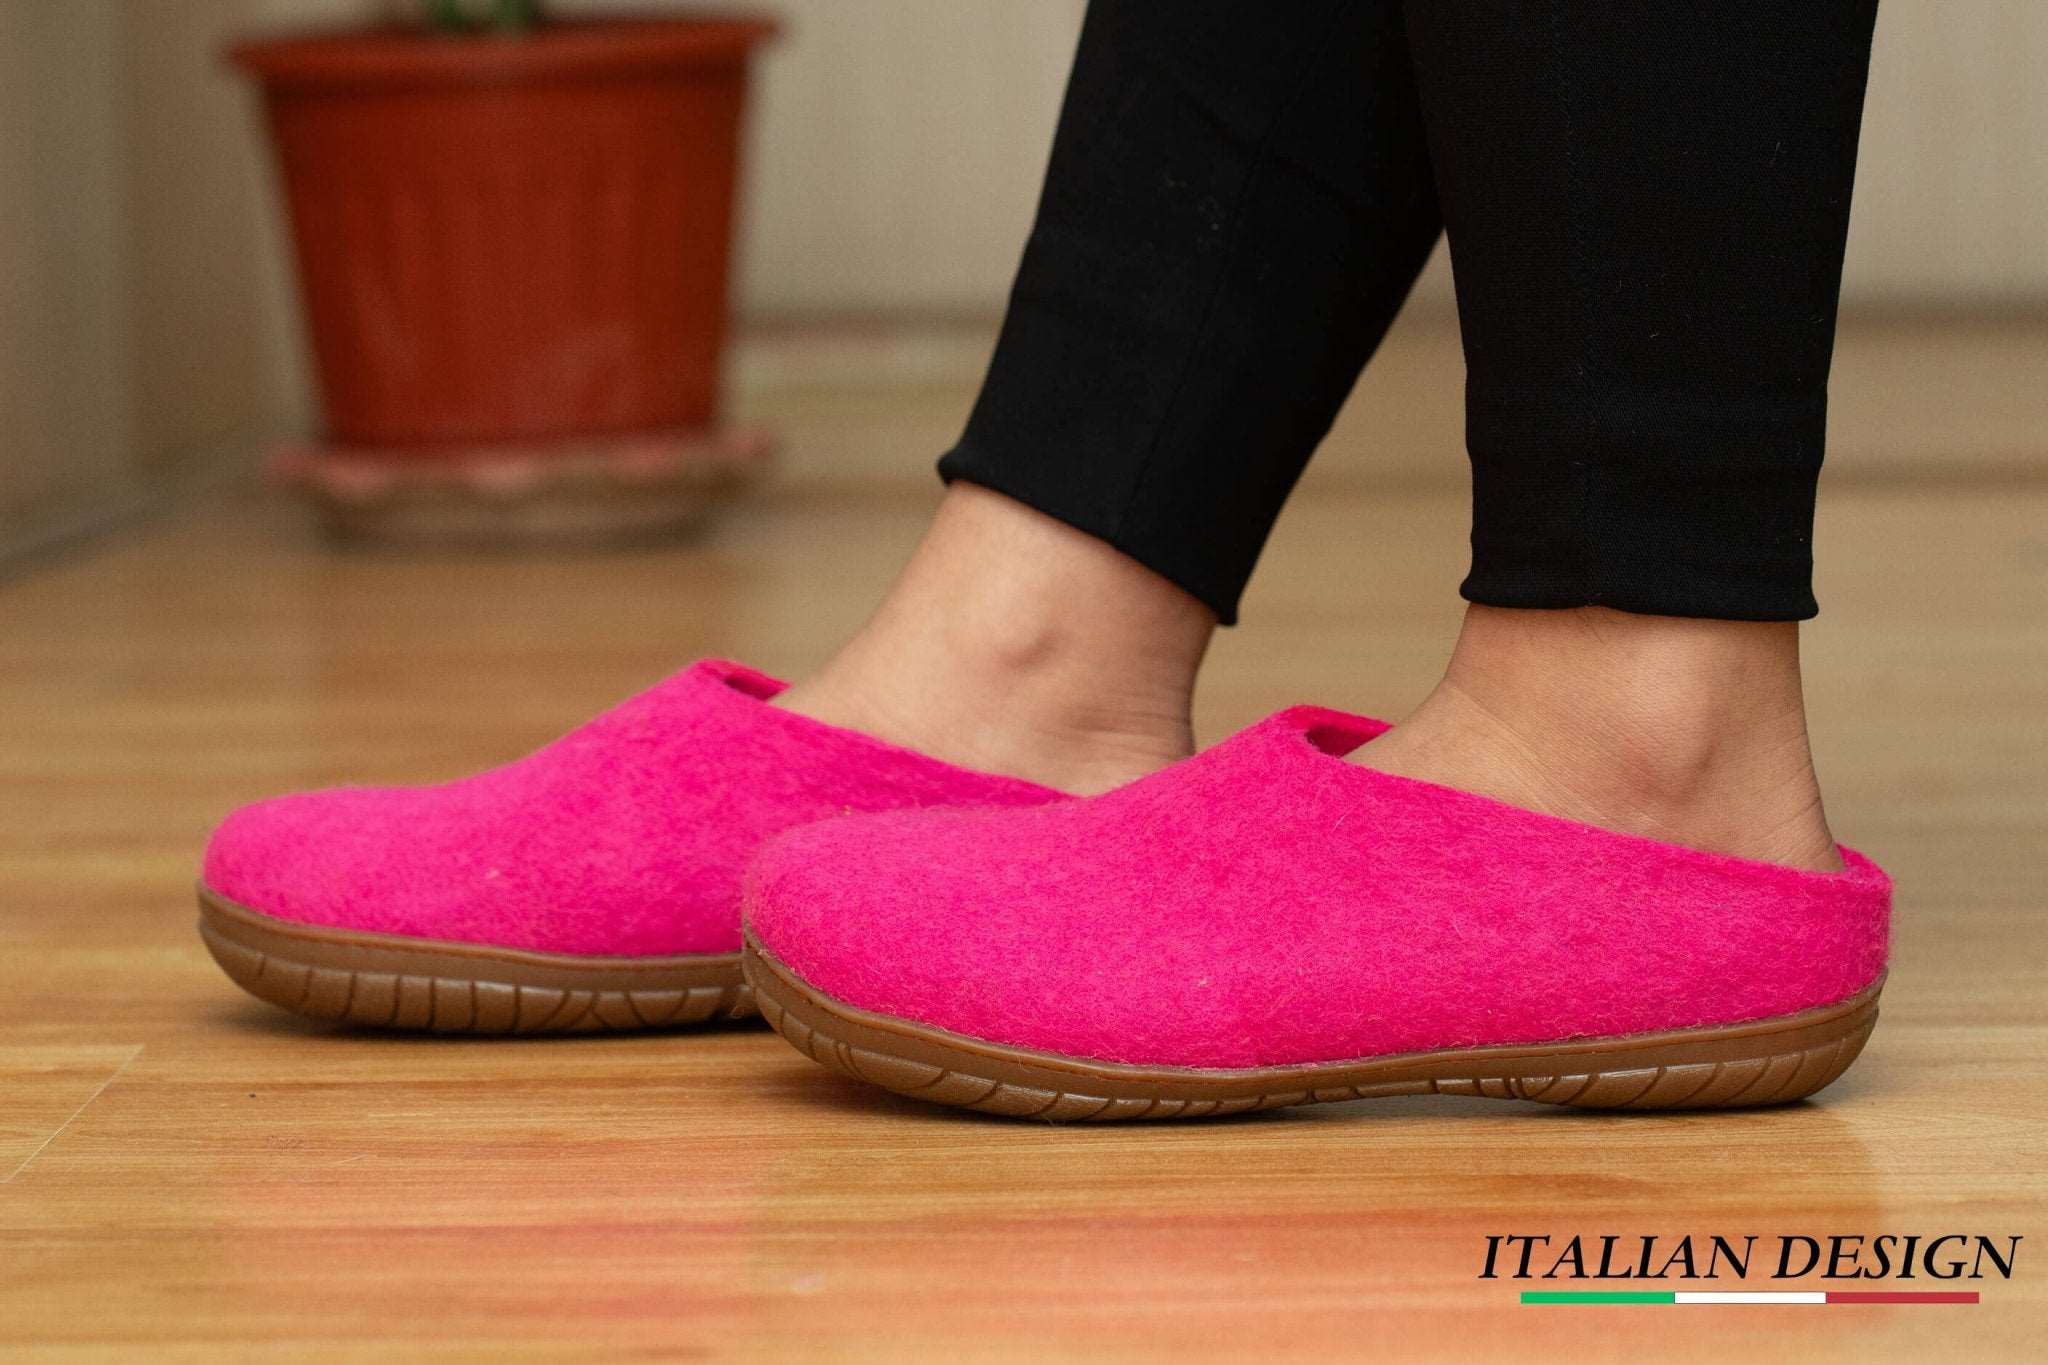 Outdoor Open Heel Slippers With Rubber Sole - Fuchsia - Woollyes